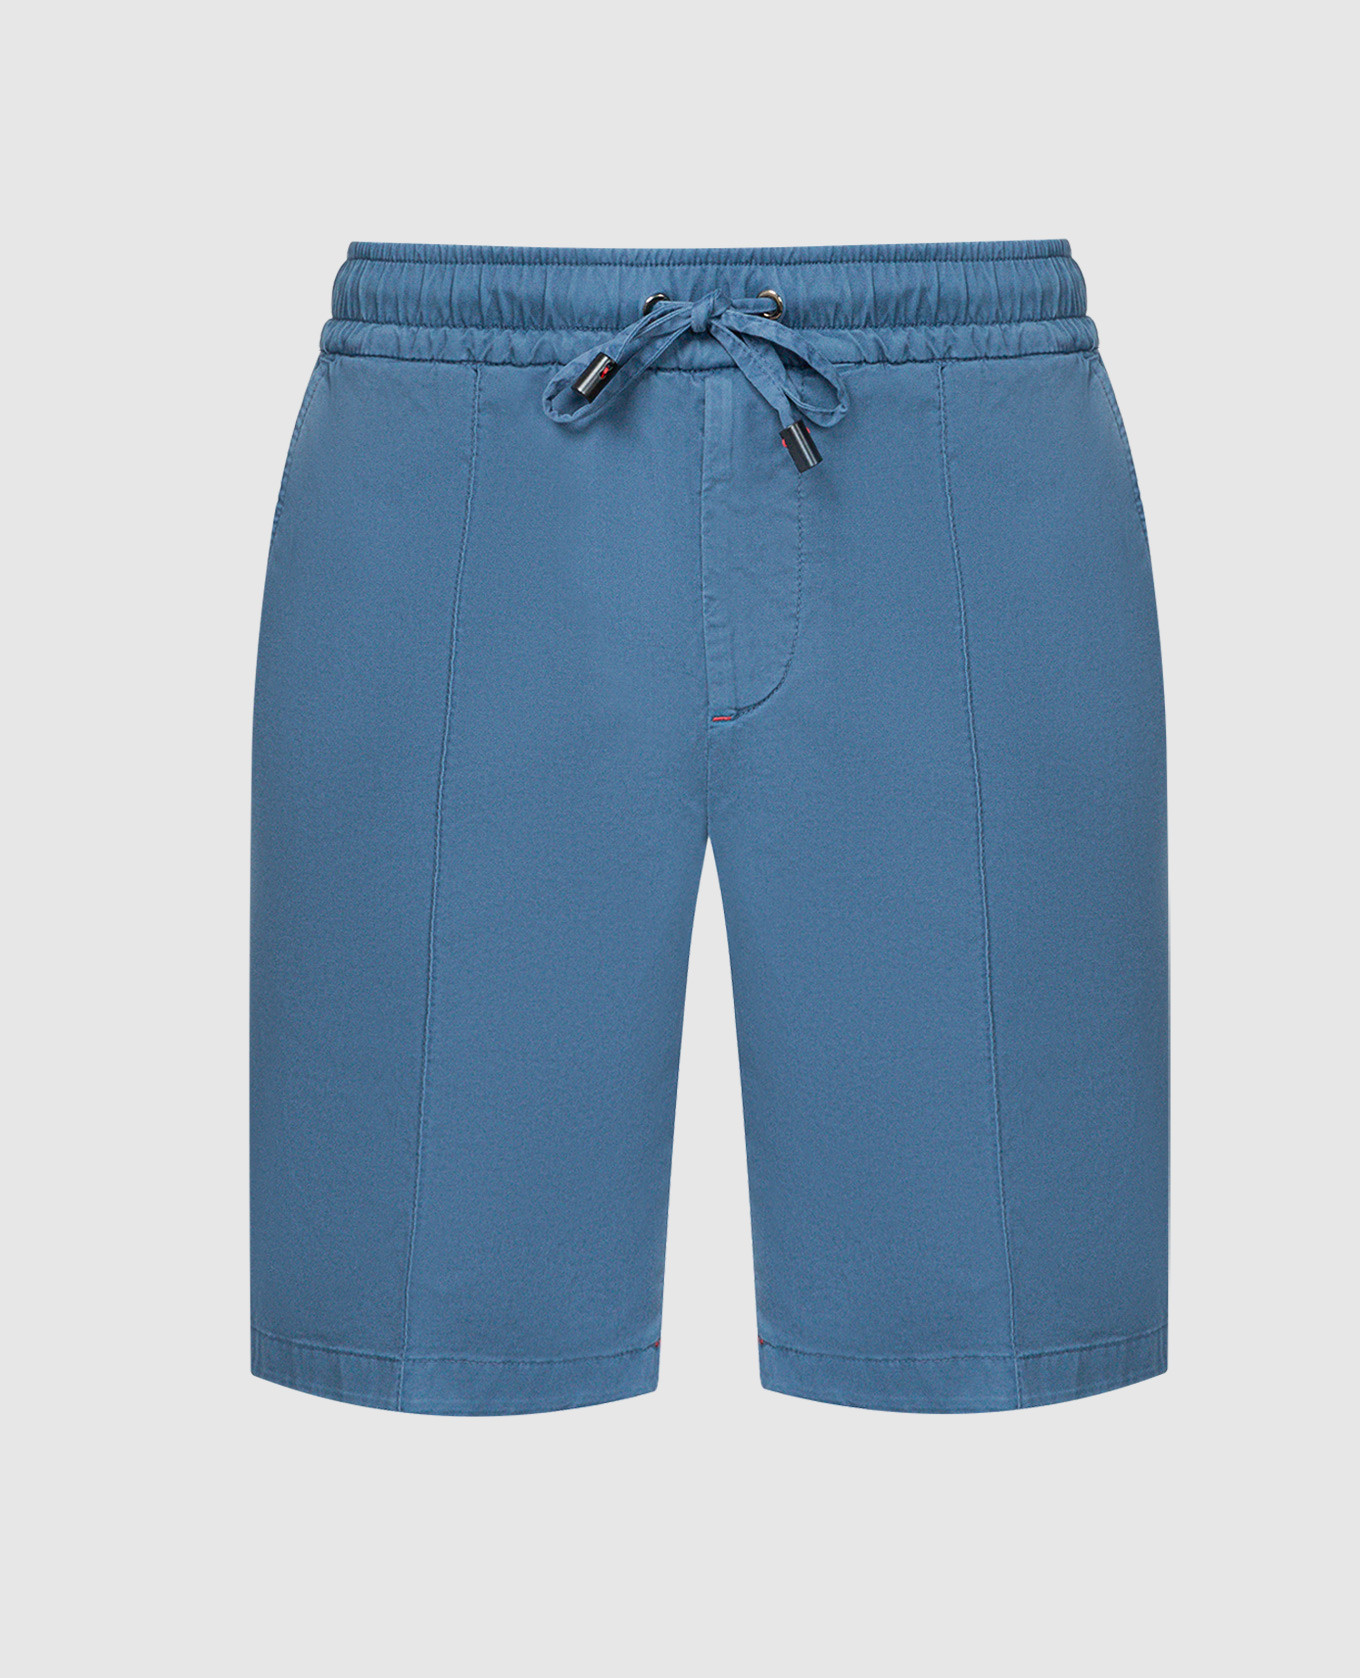 Blue shorts with logo embroidery